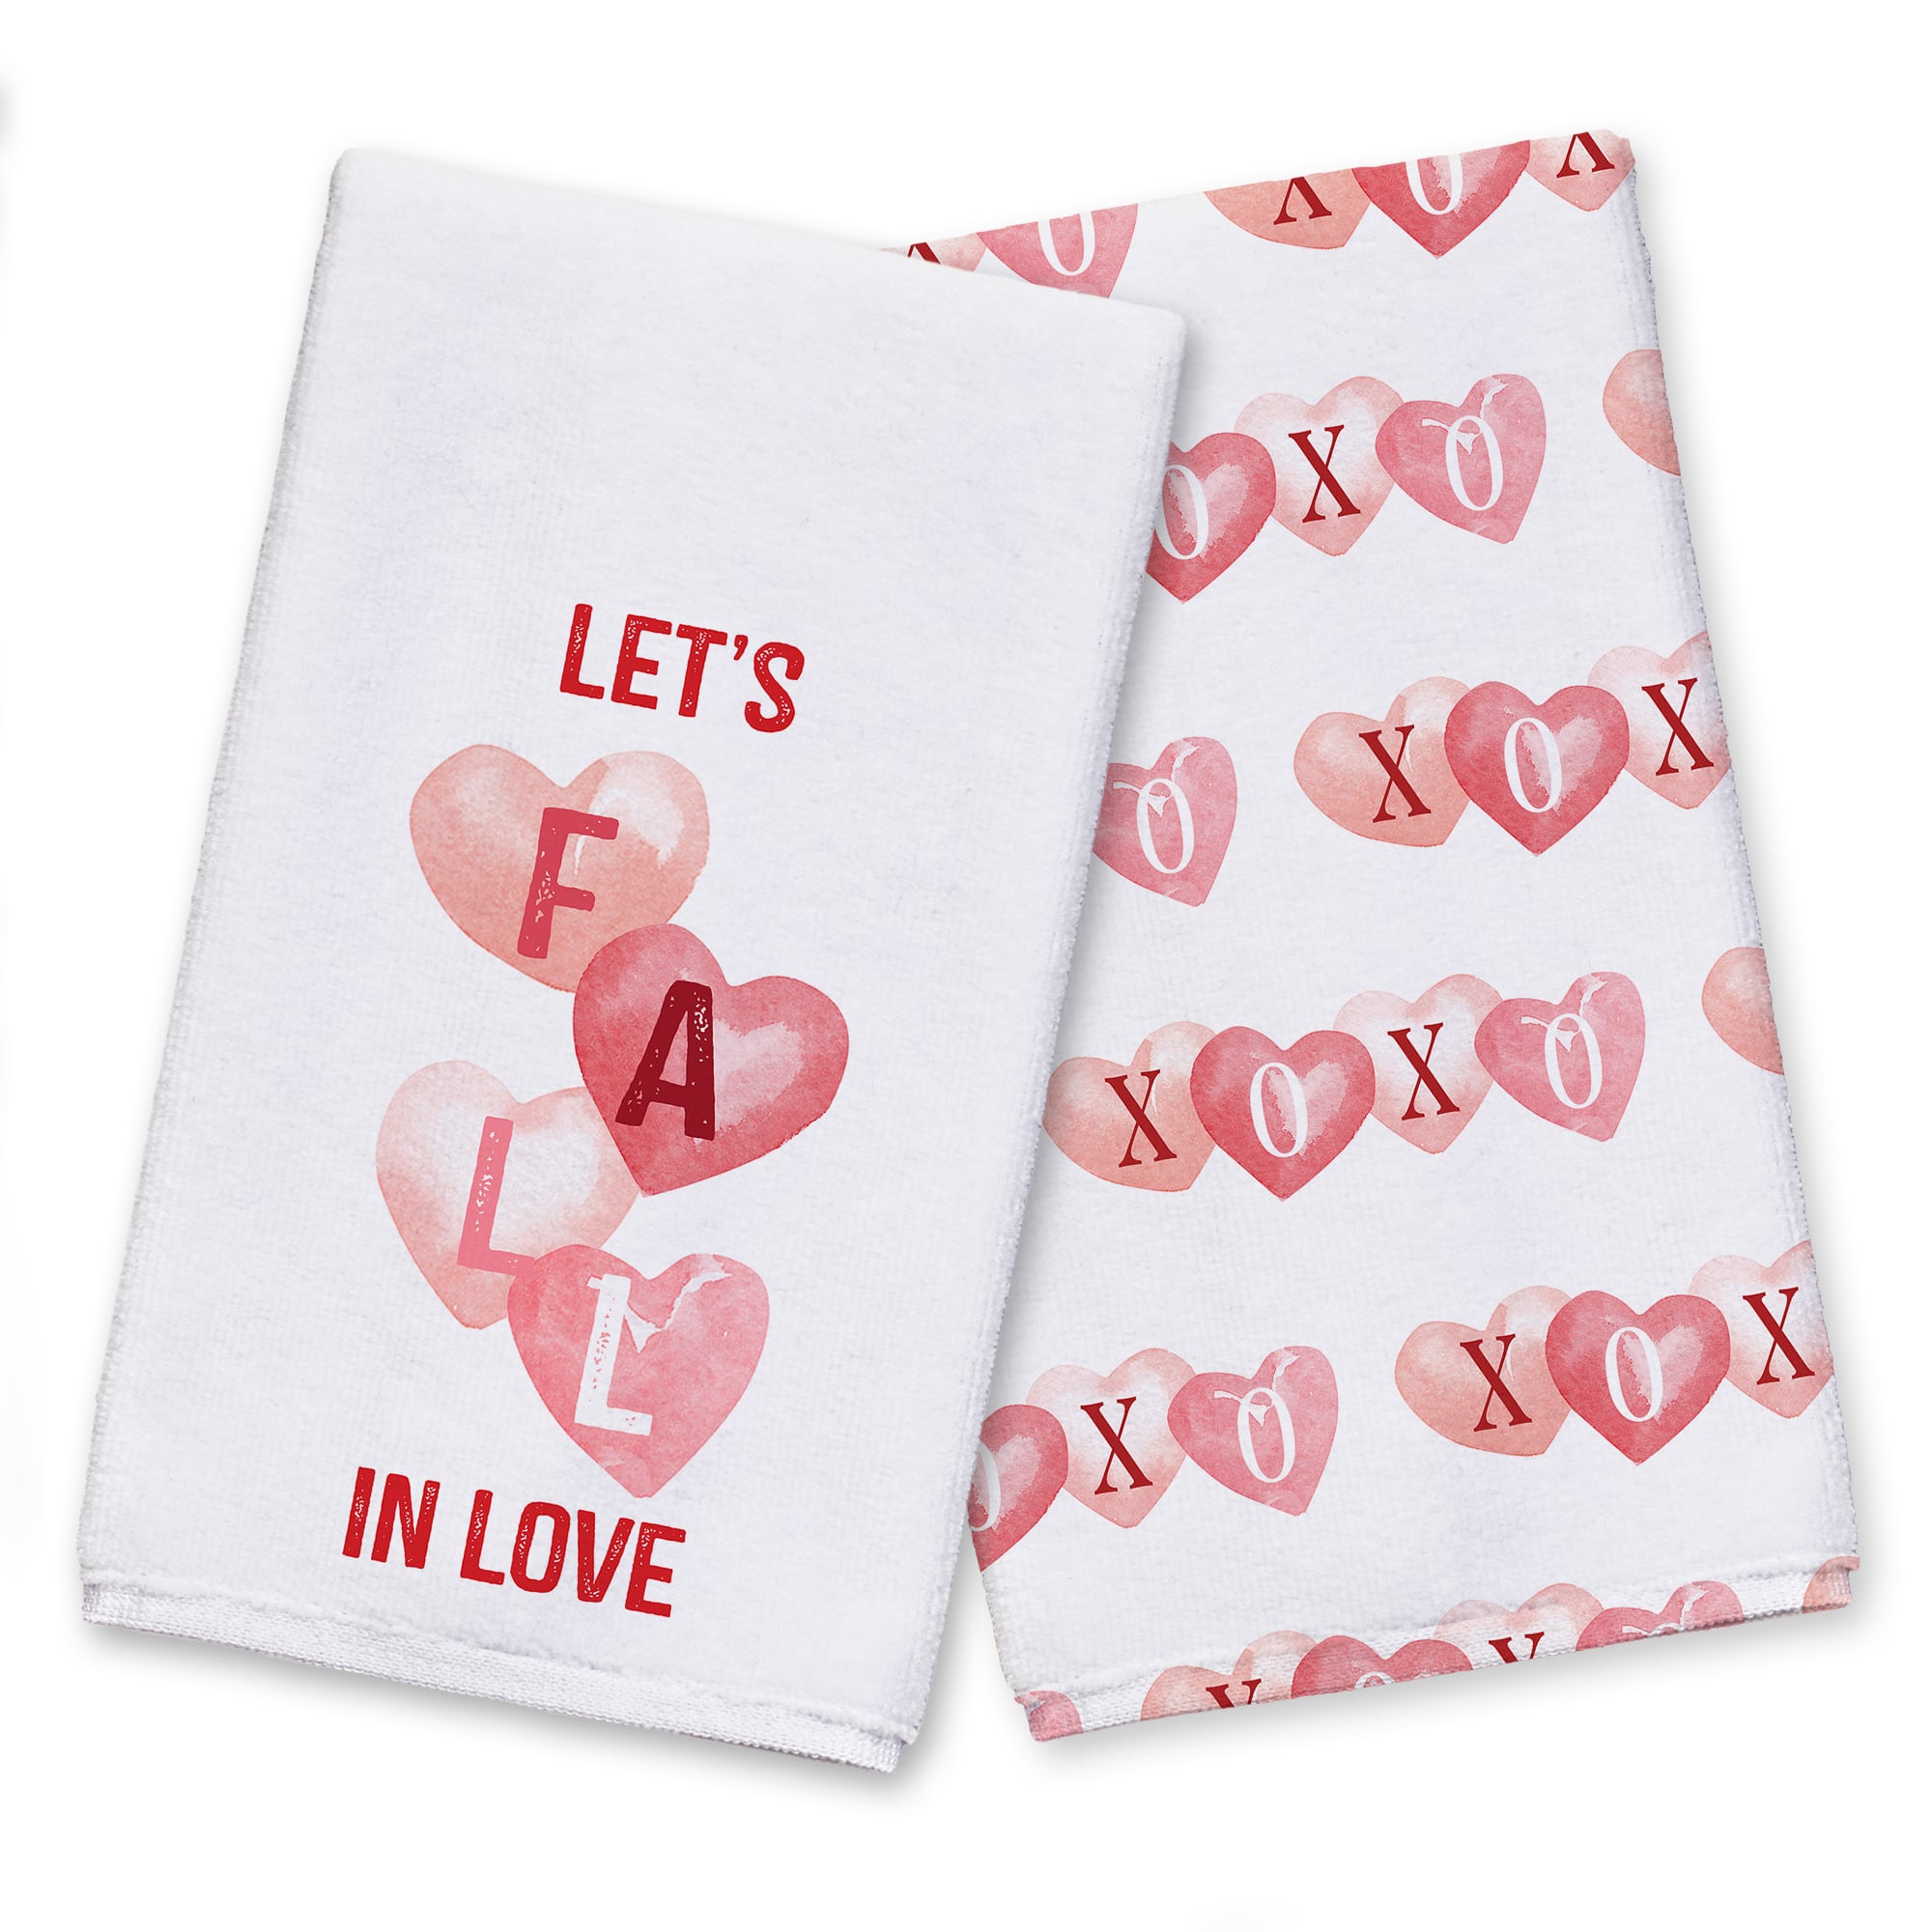 Let&#x27;s Fall In Love Hand Towel Set